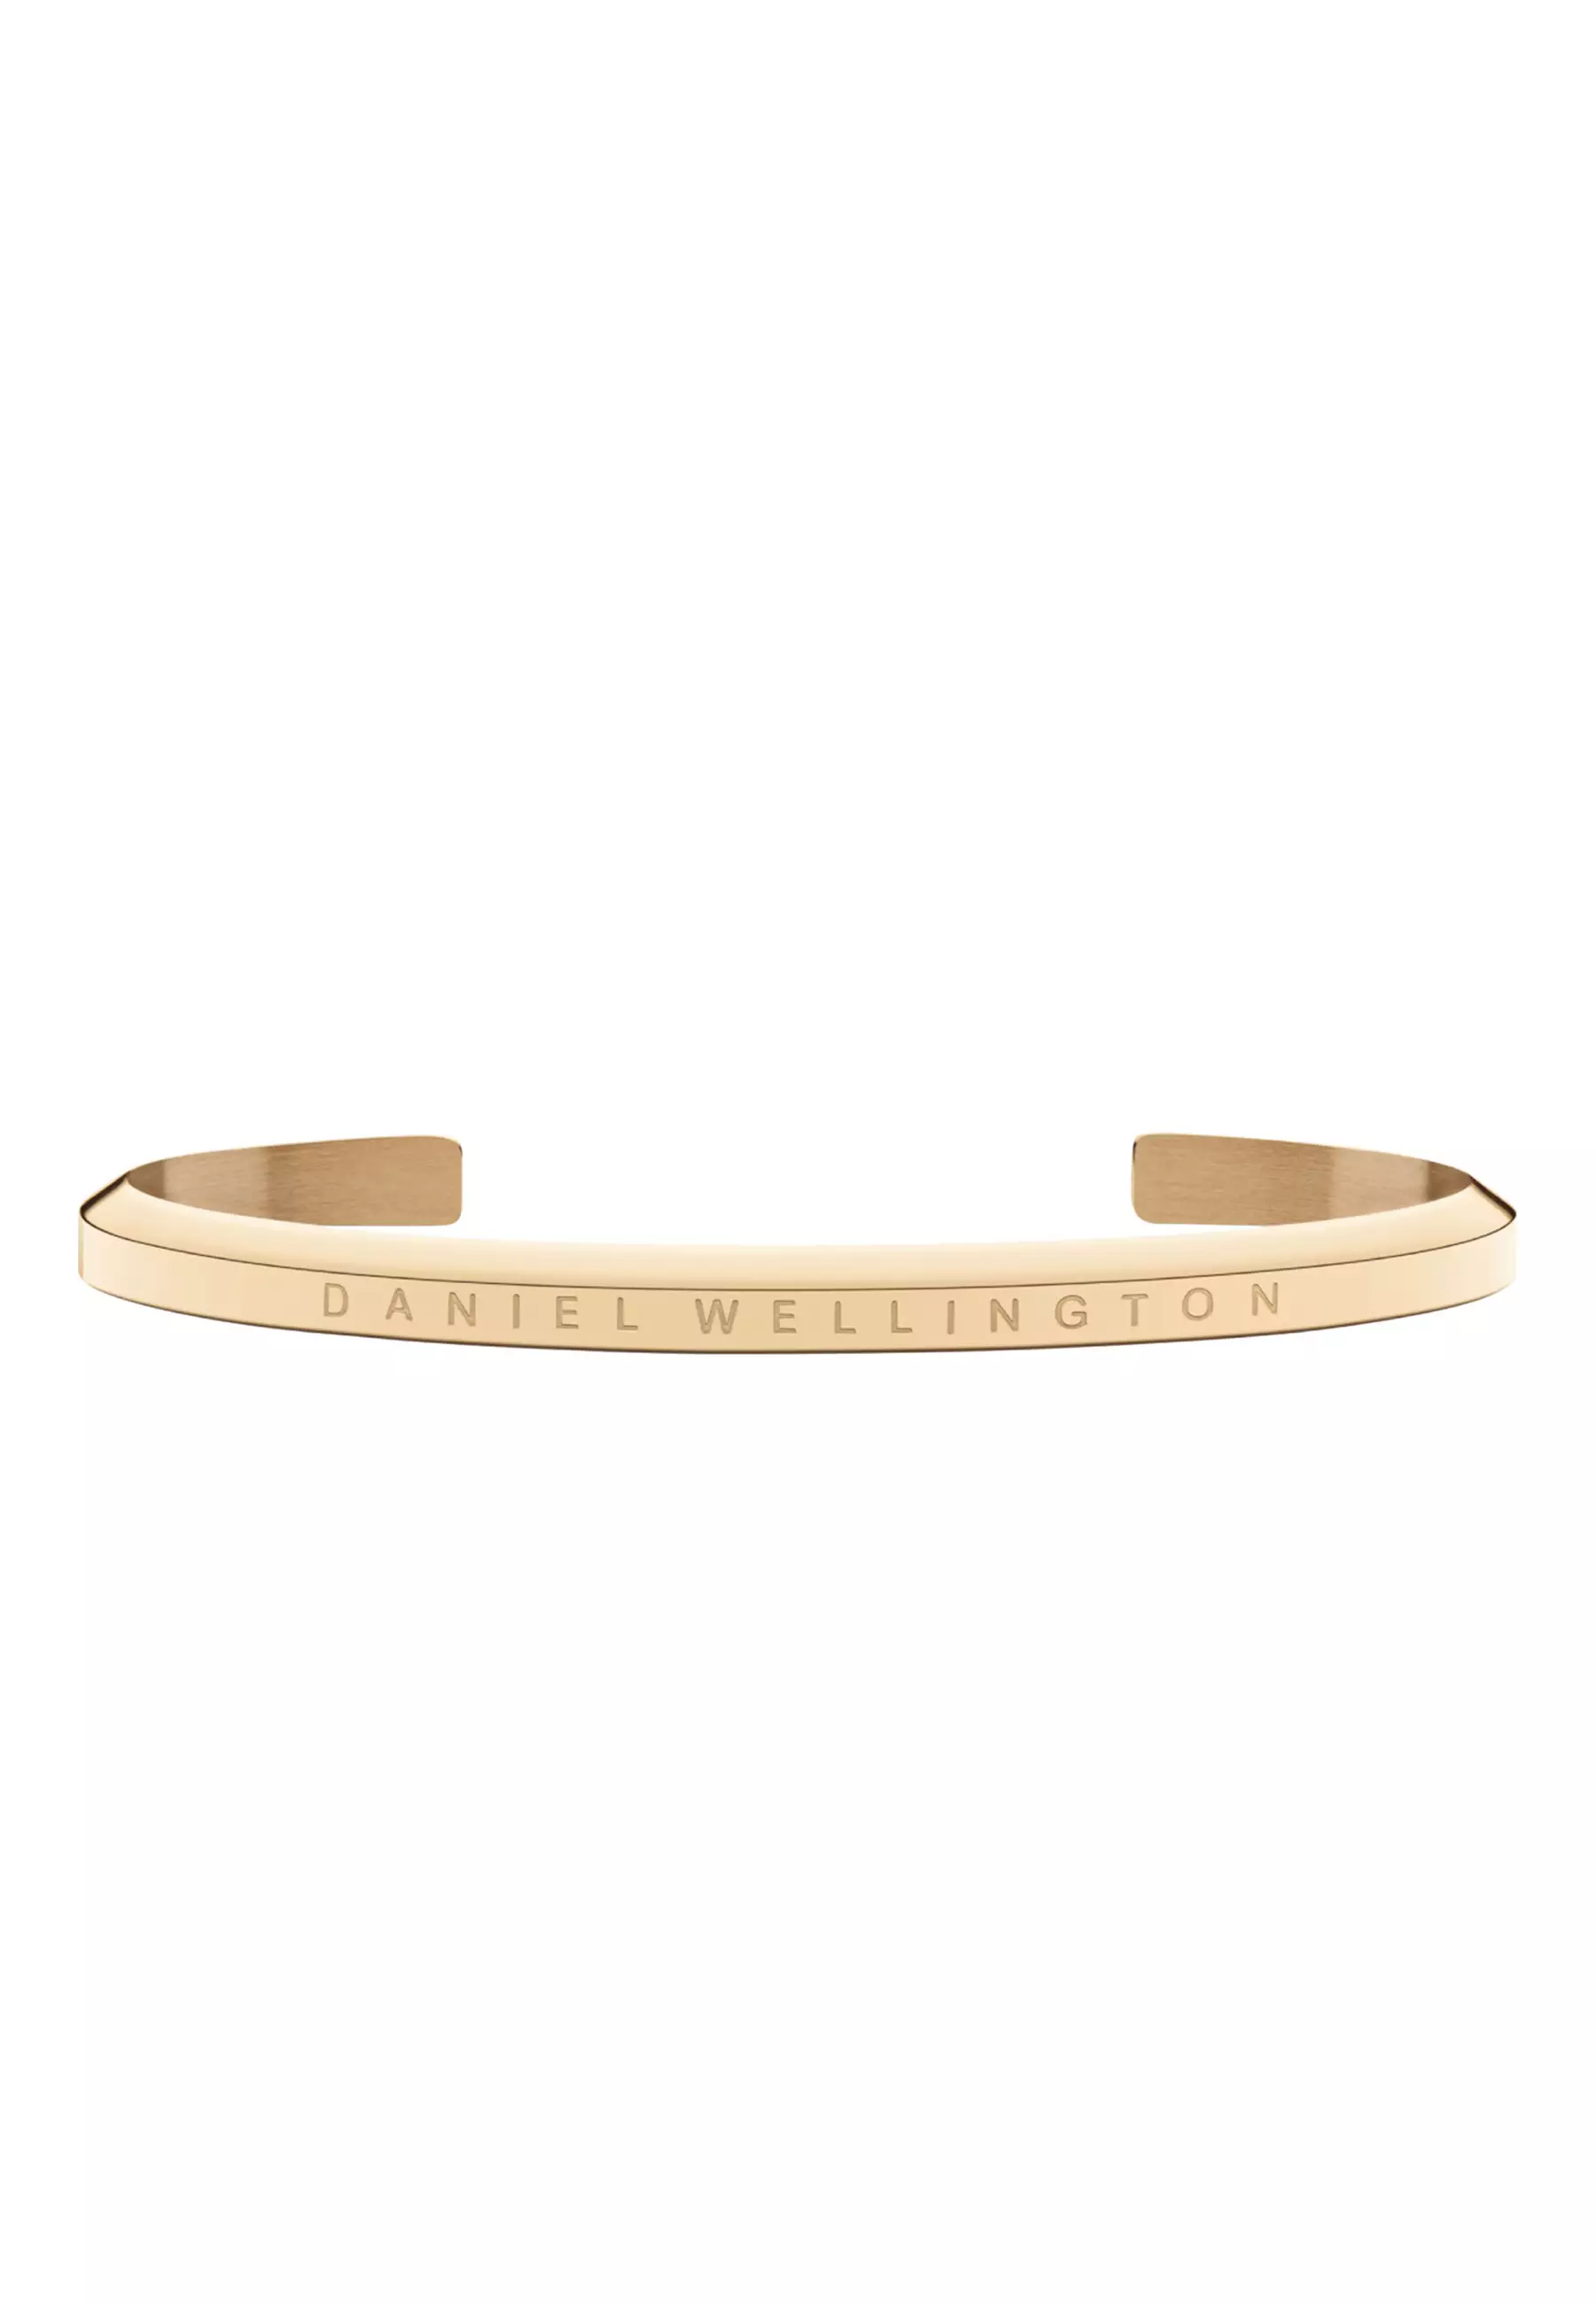 Classic Bracelet Gold Small - DW OFFICIAL - Stainless steel Enamel cuff bracelet for women and men